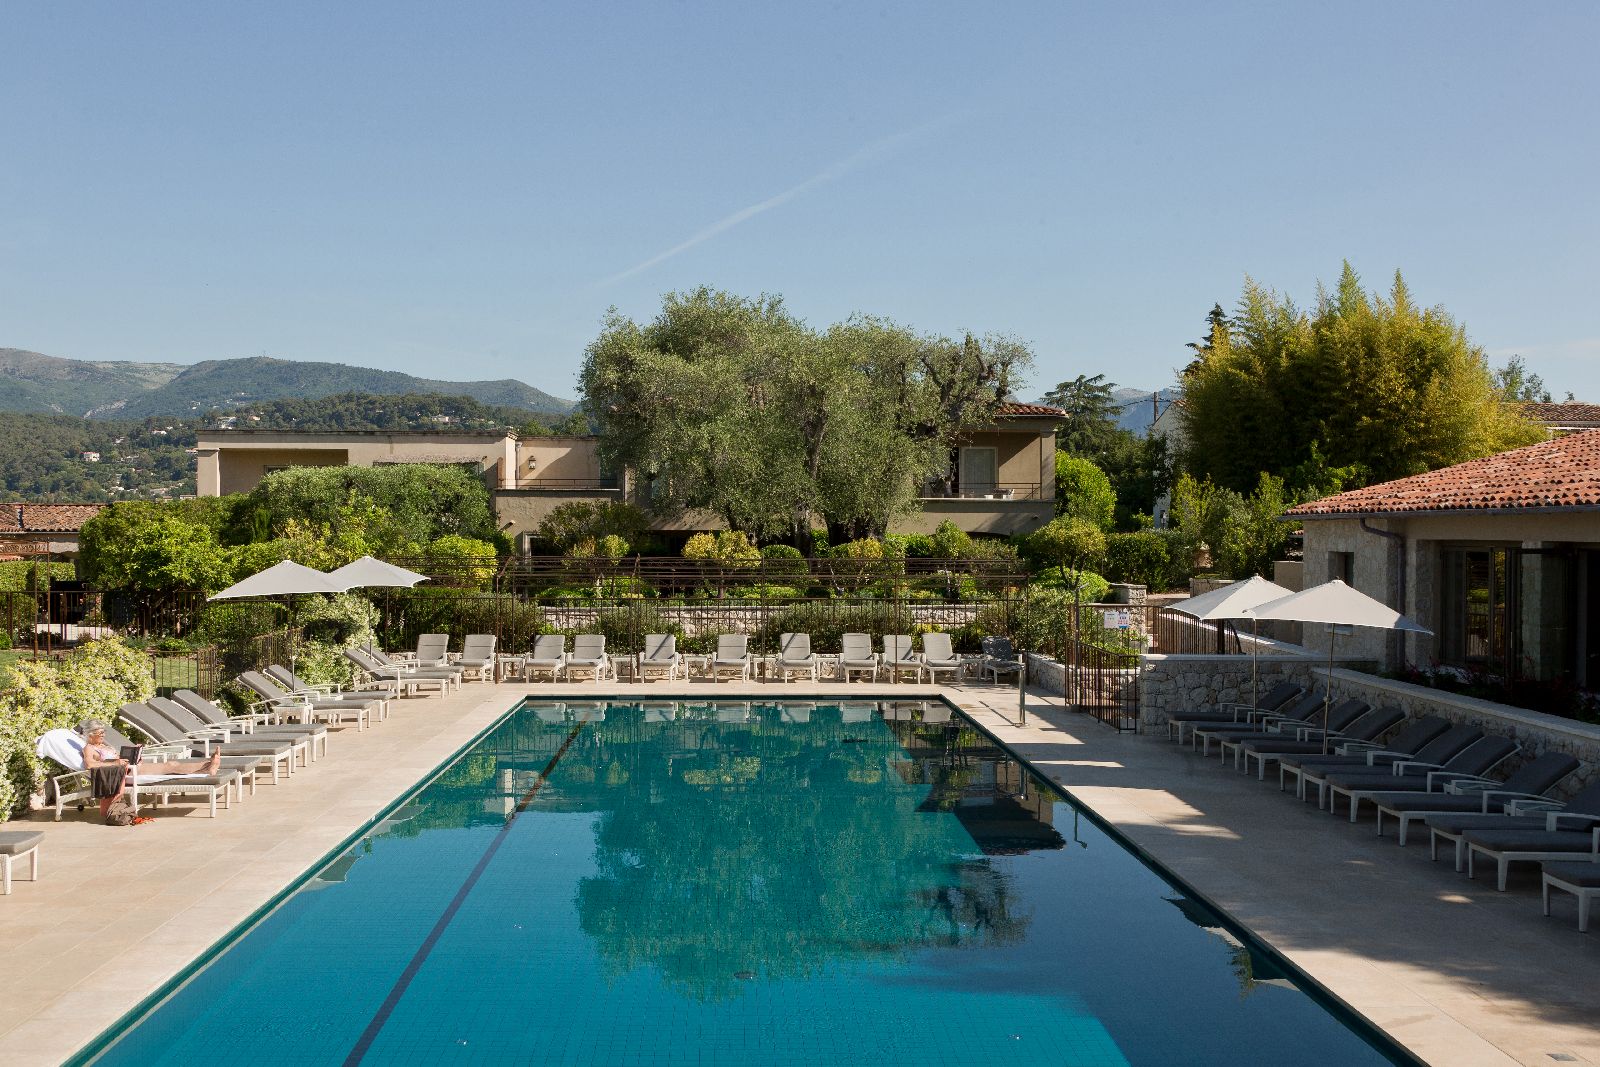 Swimming pool and terrace at Domaine du Mas de Pierre in Provence France